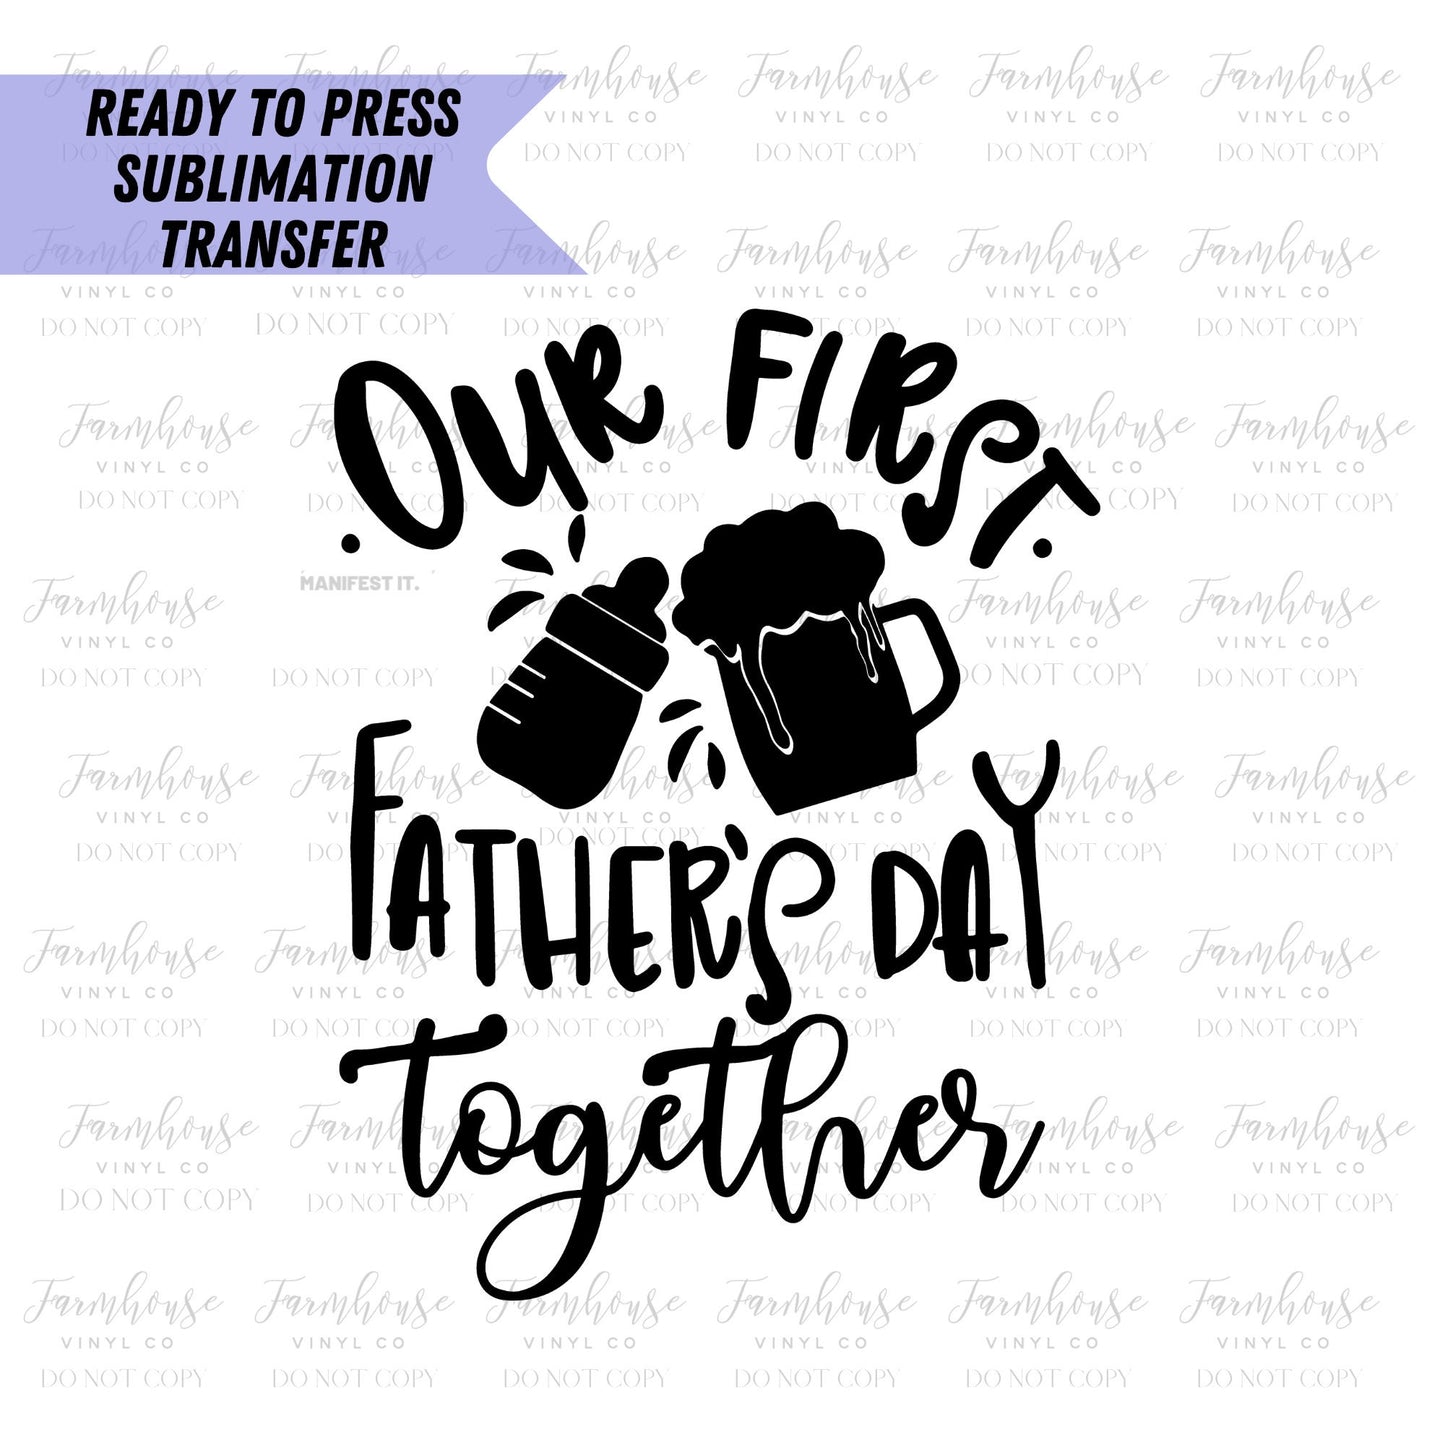 Our 1st Fathers Day Together Ready To Press Sublimation Transfer - Farmhouse Vinyl Co